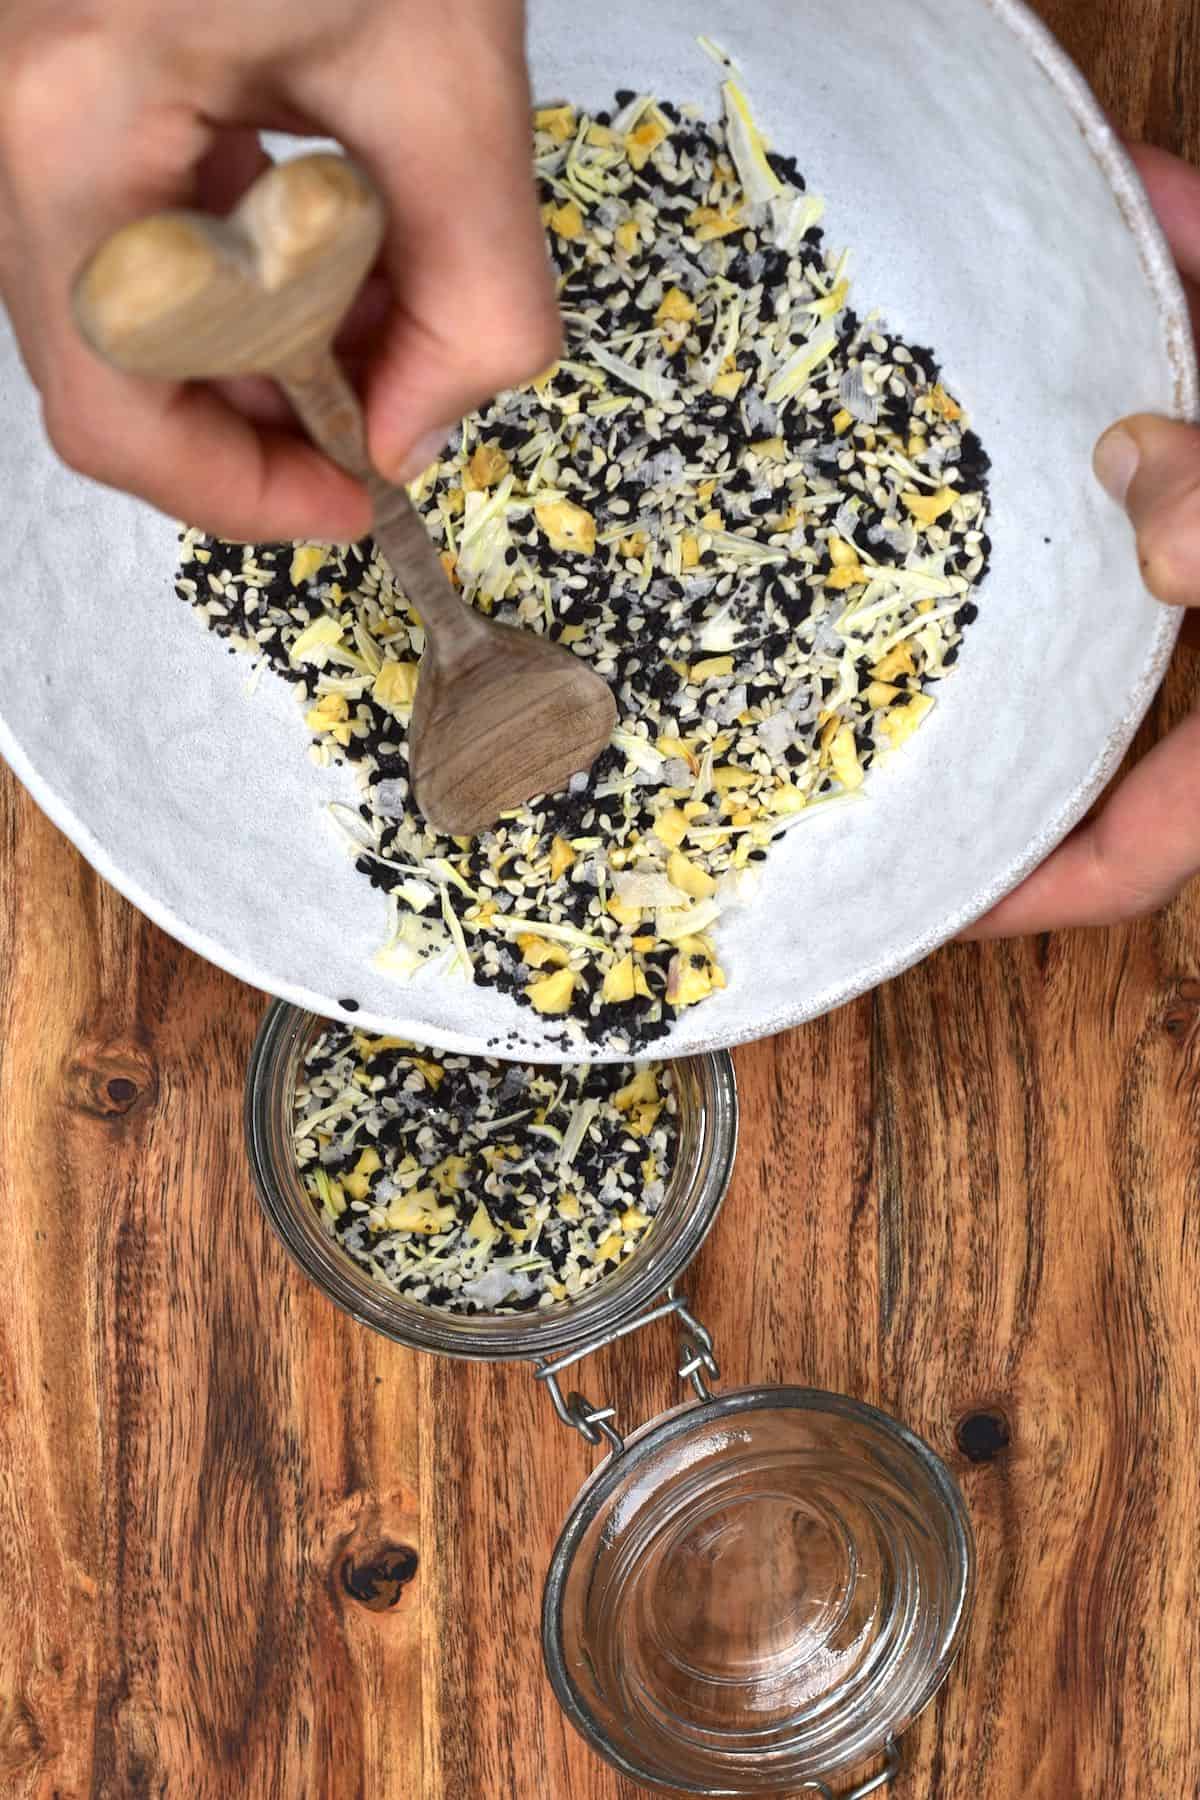 Filling up a jar with Everything Bagel Seasoning